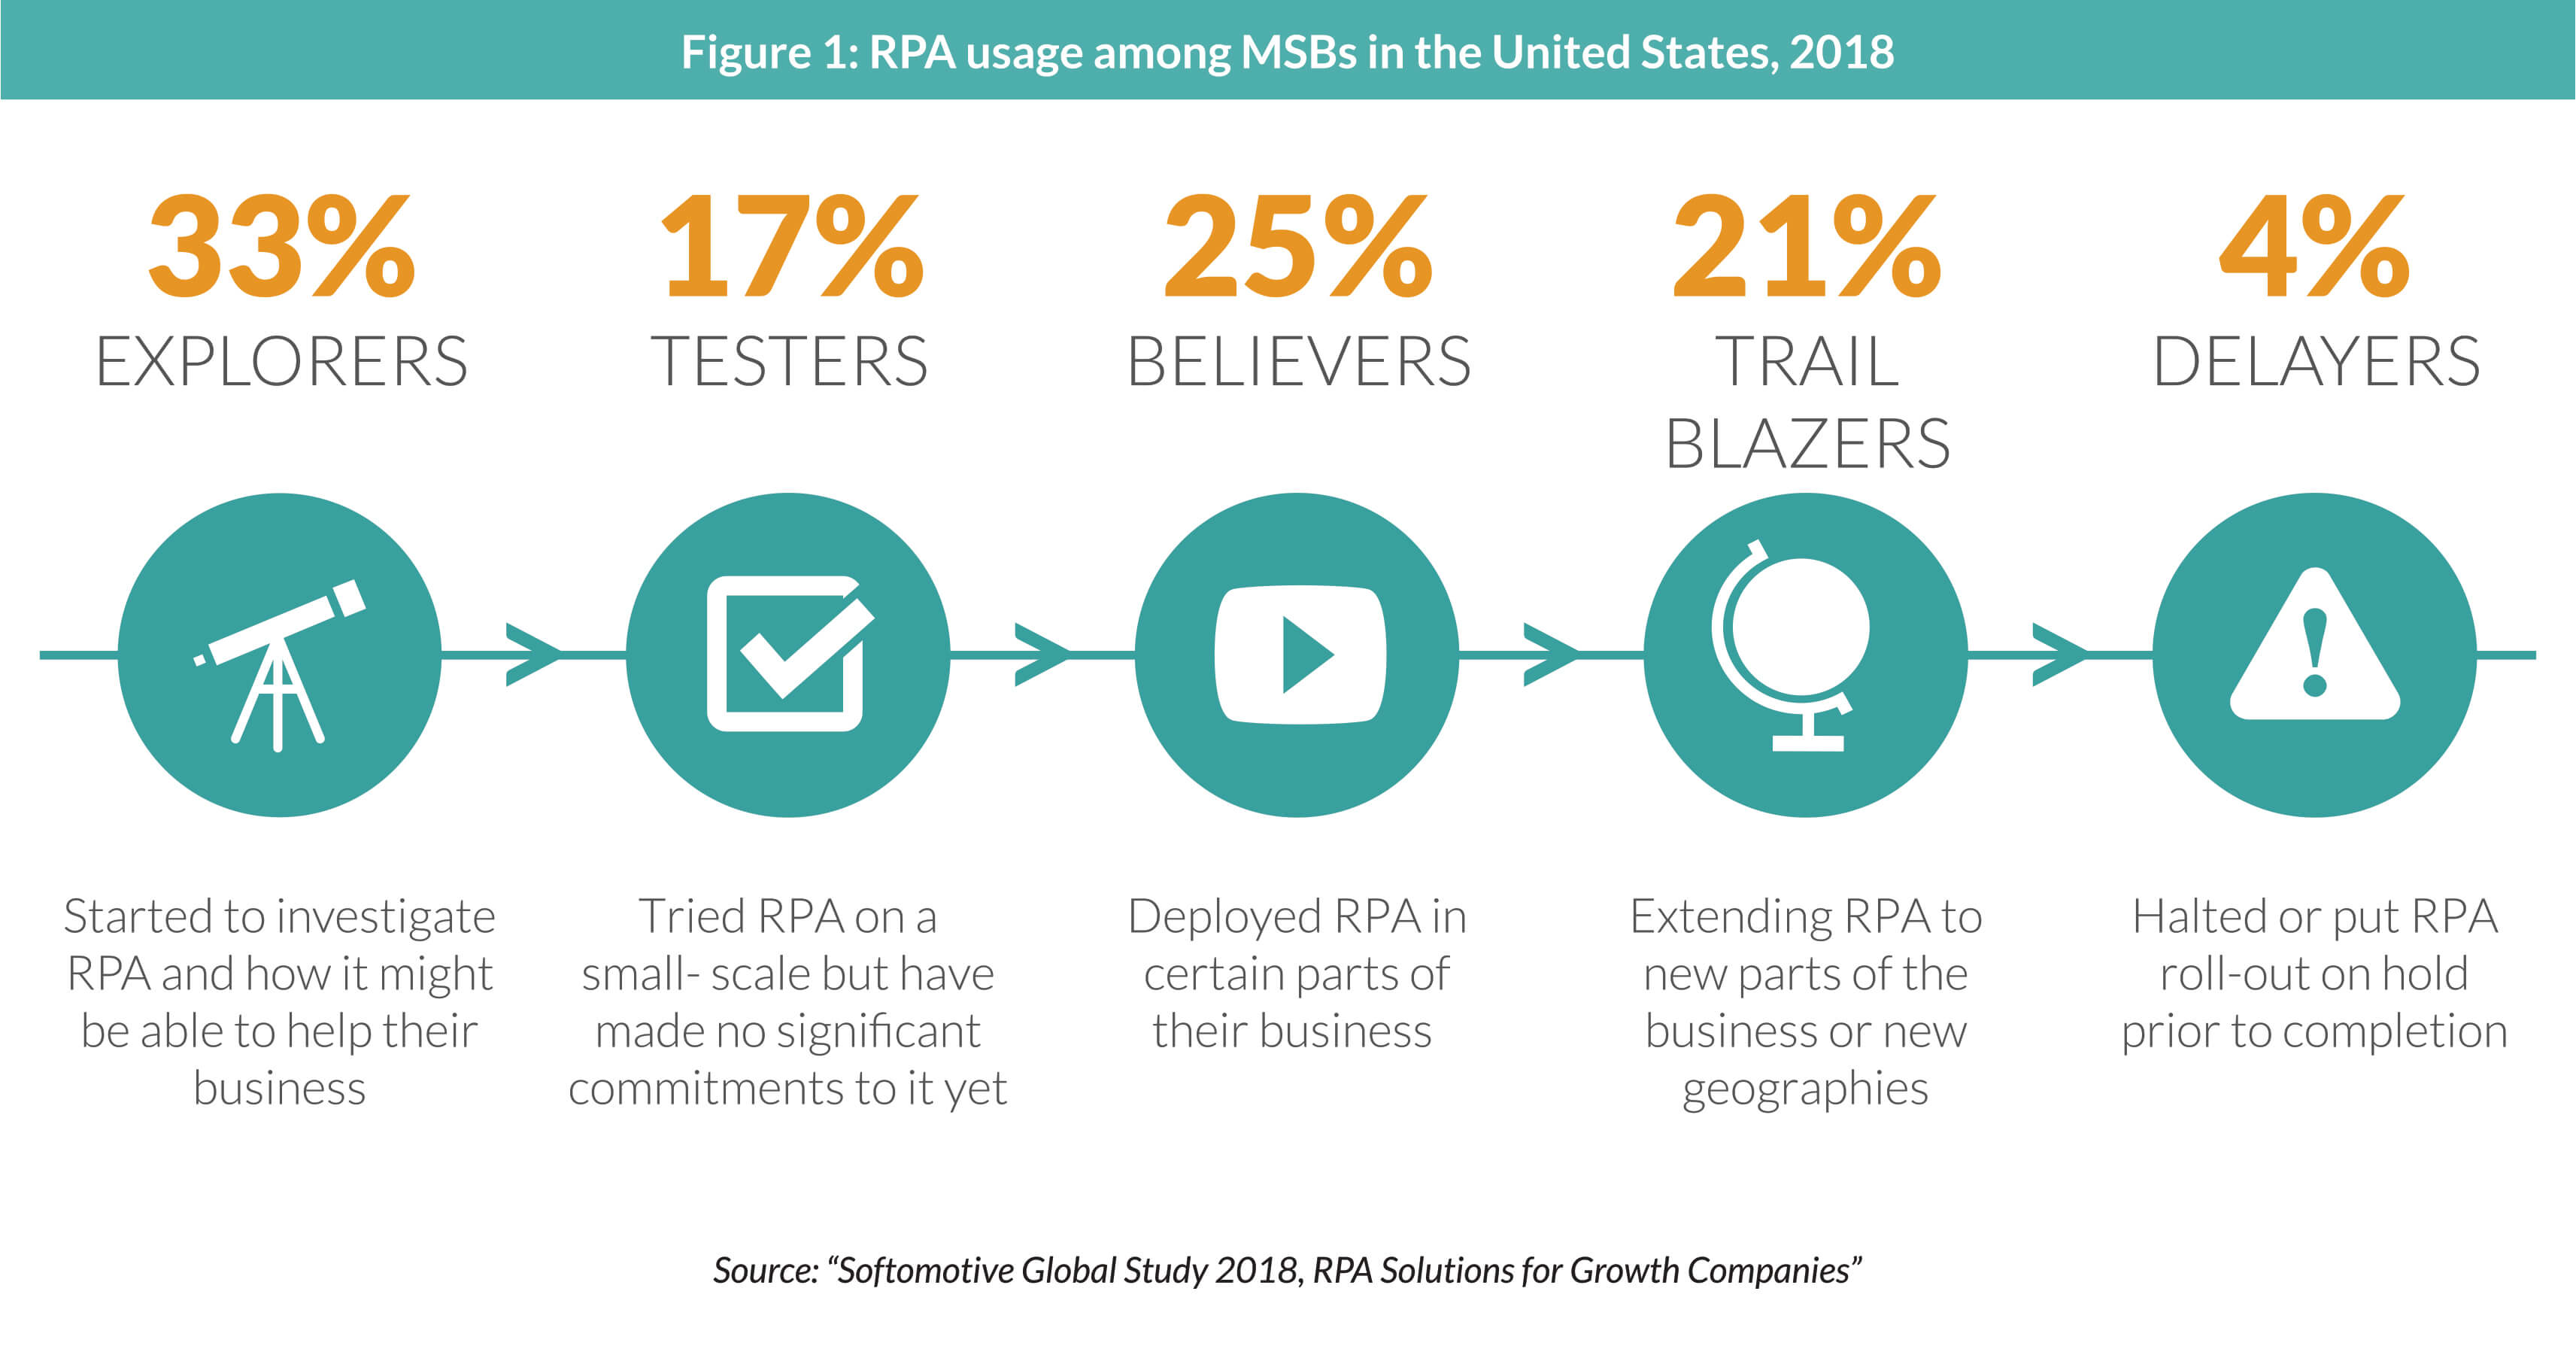 RPA Usage among MSBs in the United States, 2018